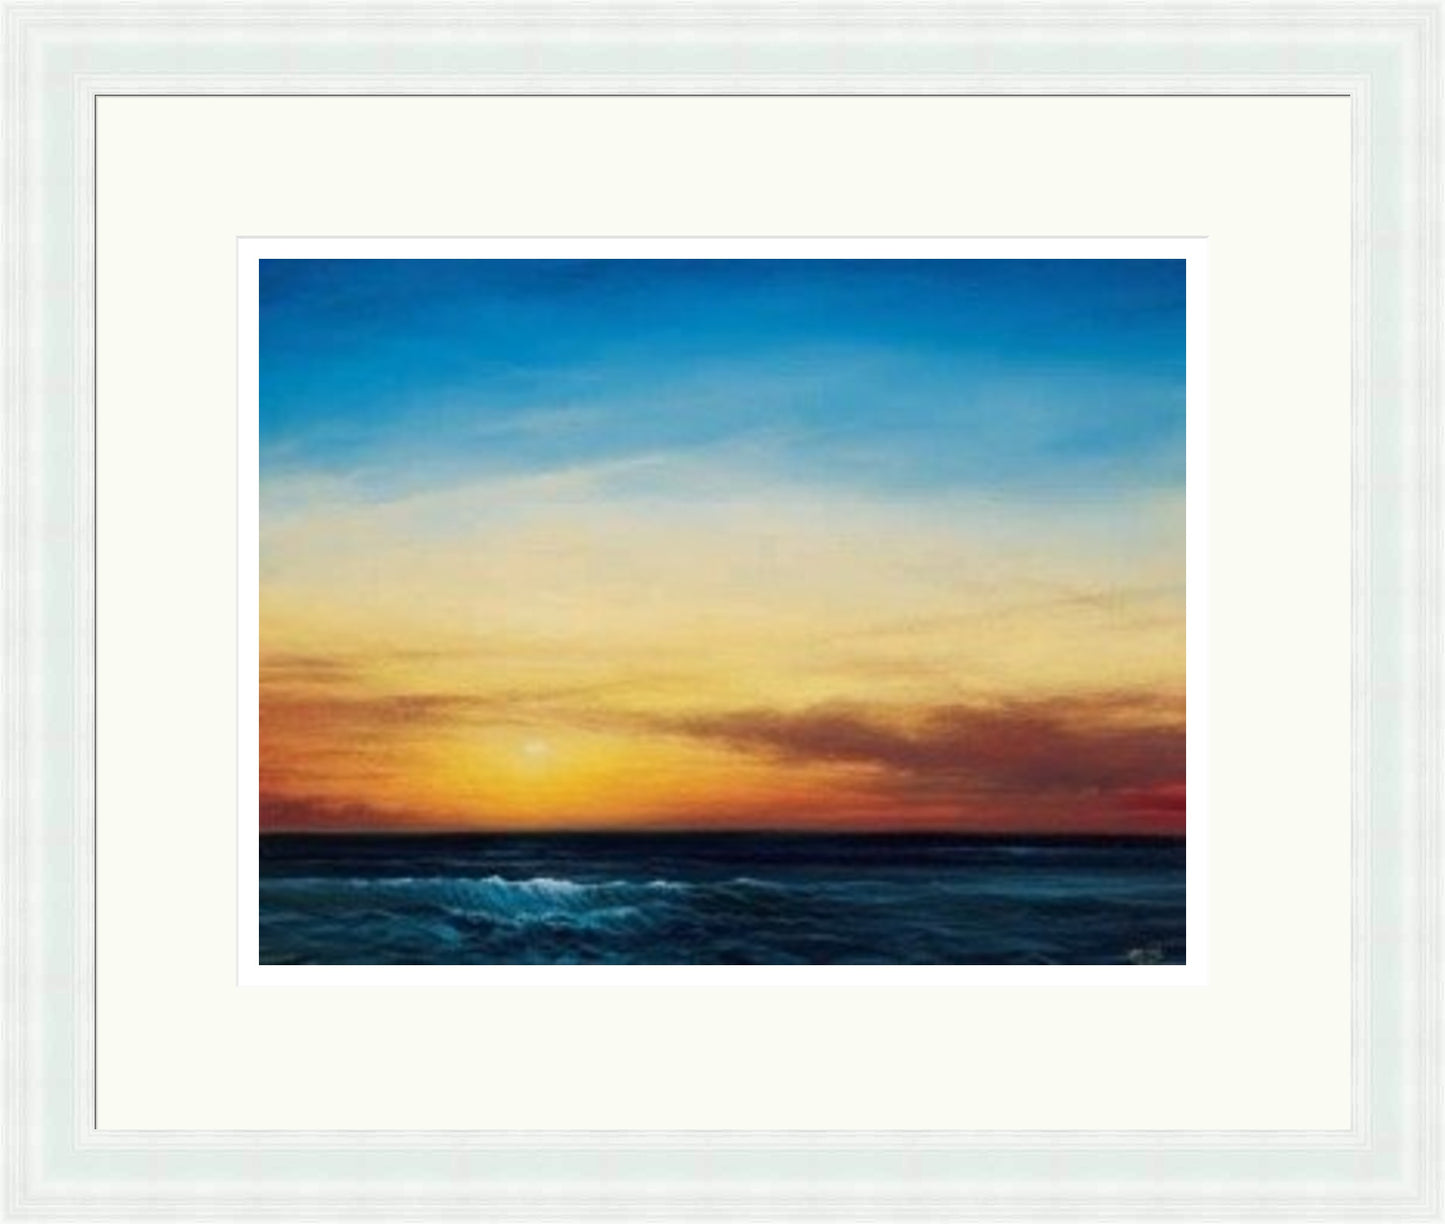 Sunset over the Sea (Limited Edition) by Derek Hare